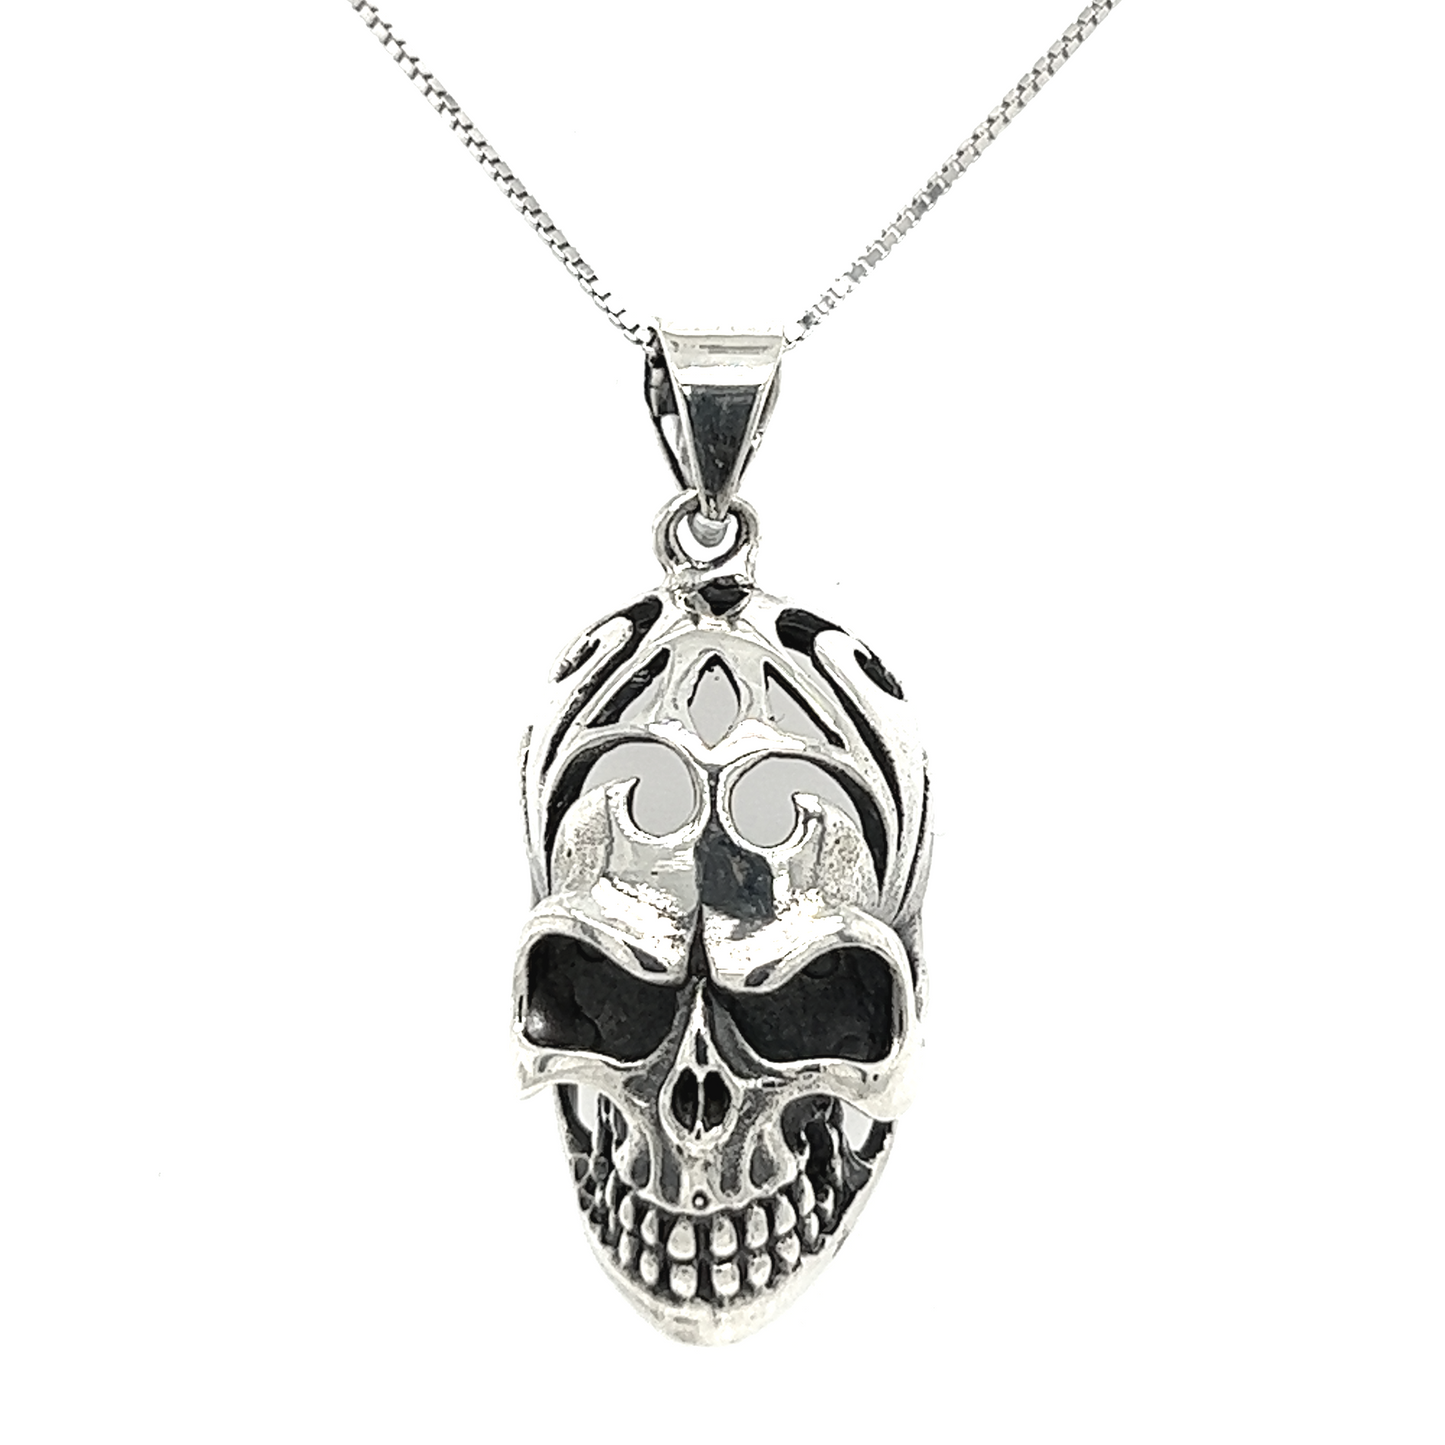 A distinctive Super Silver Skull Pendant with Swirl Design on a chain with an oxidized finish.